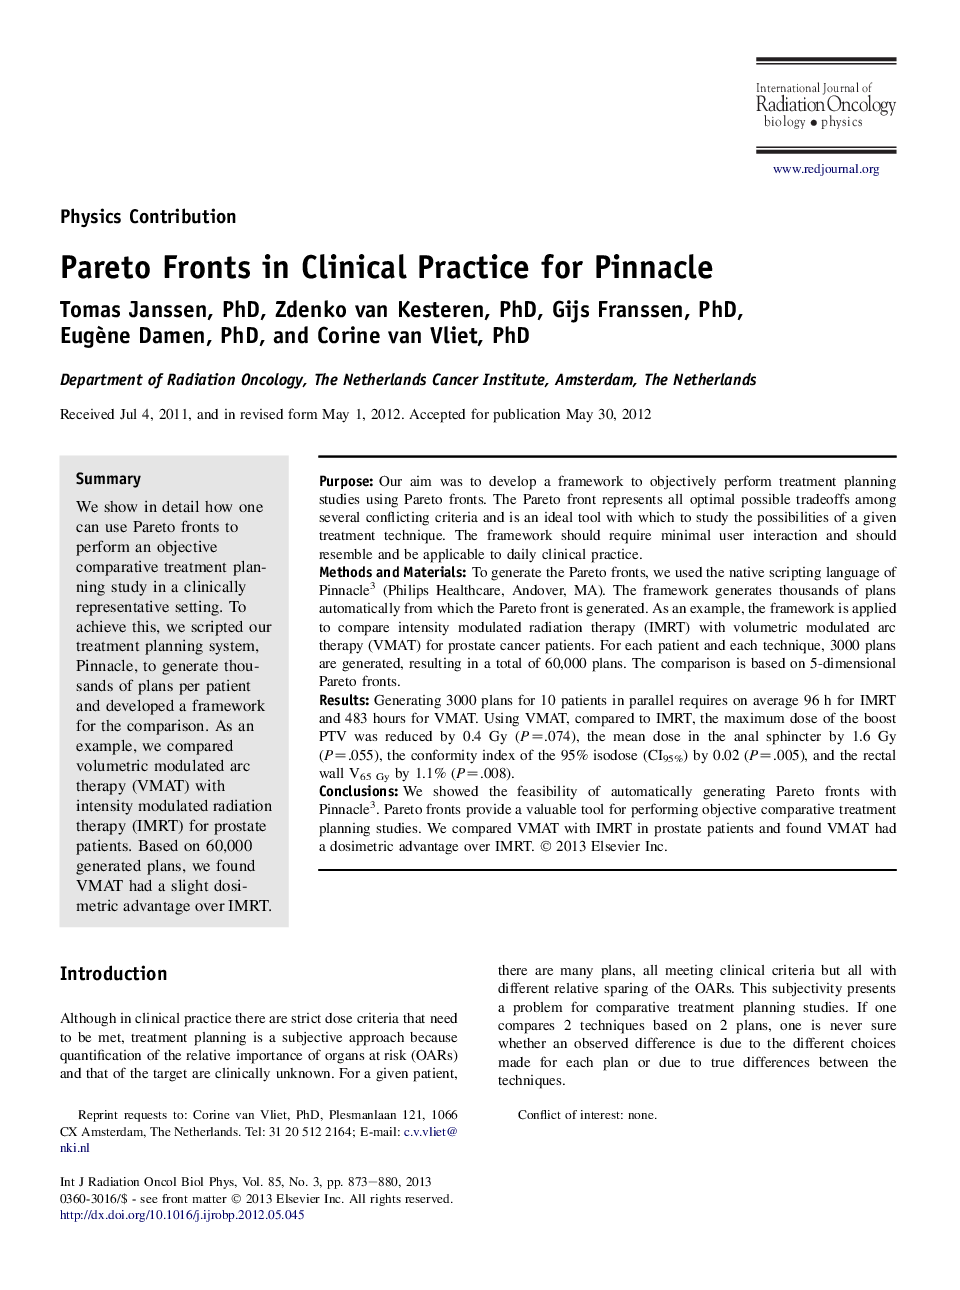 Pareto Fronts in Clinical Practice for Pinnacle